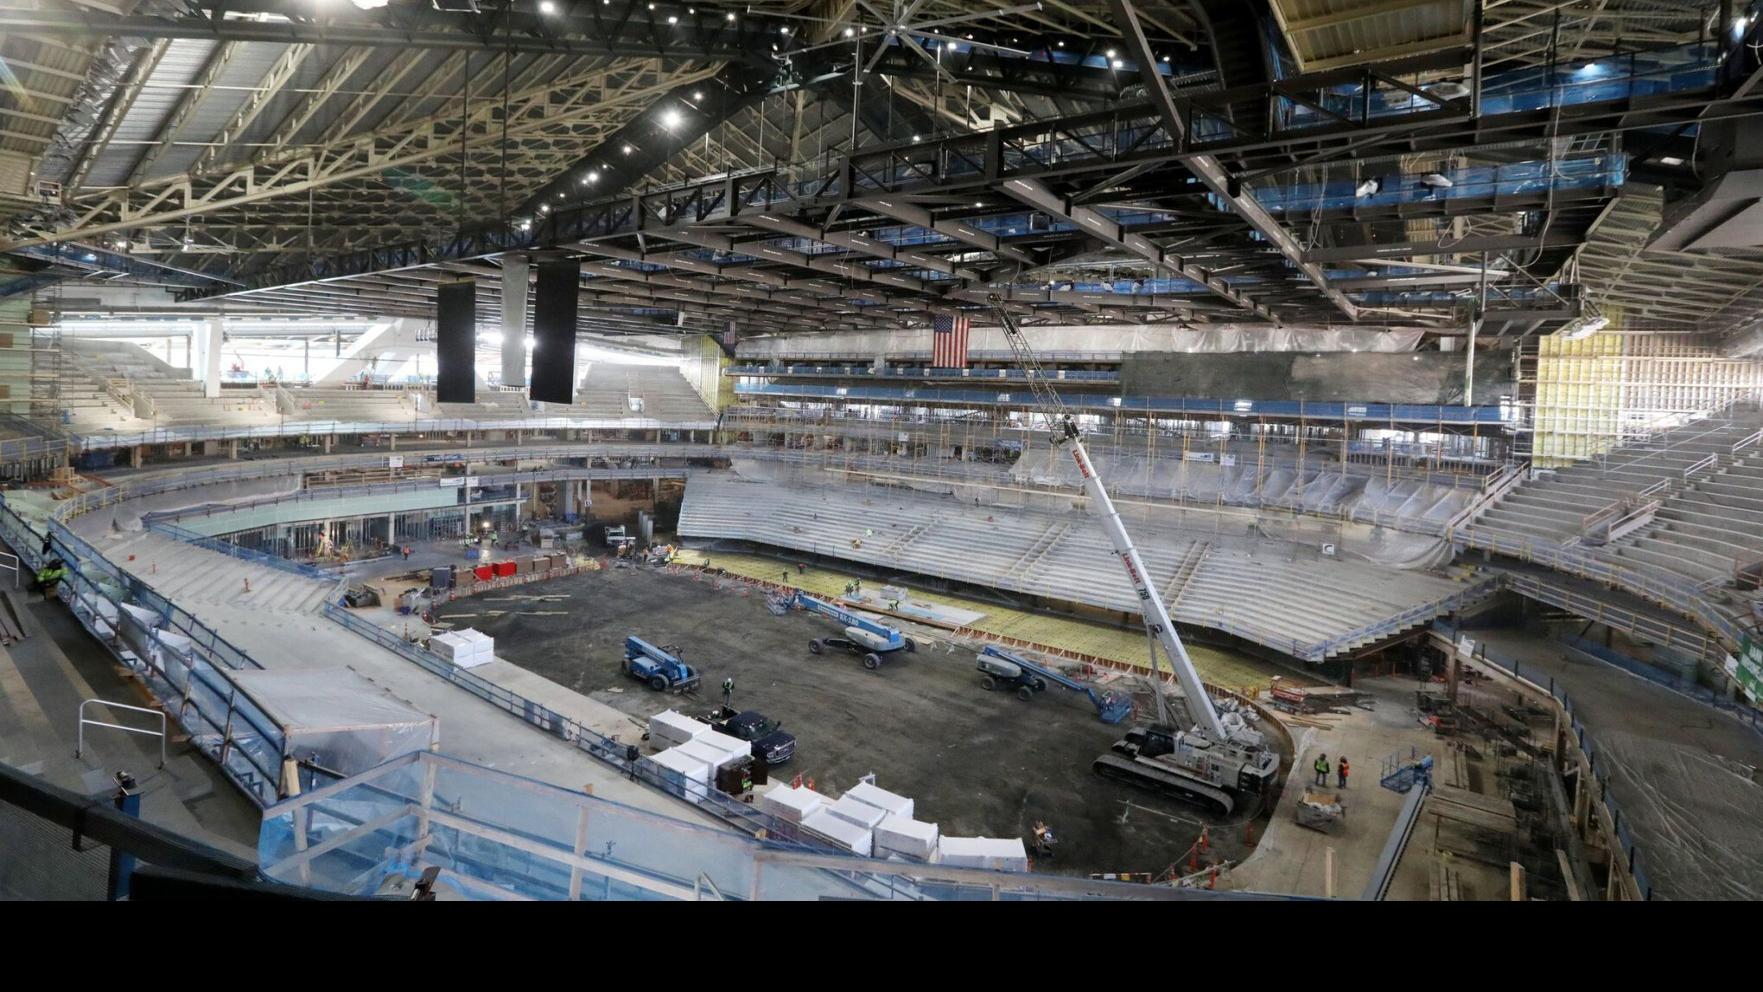 First Look: Climate Pledge Arena - Stadium Tech Report